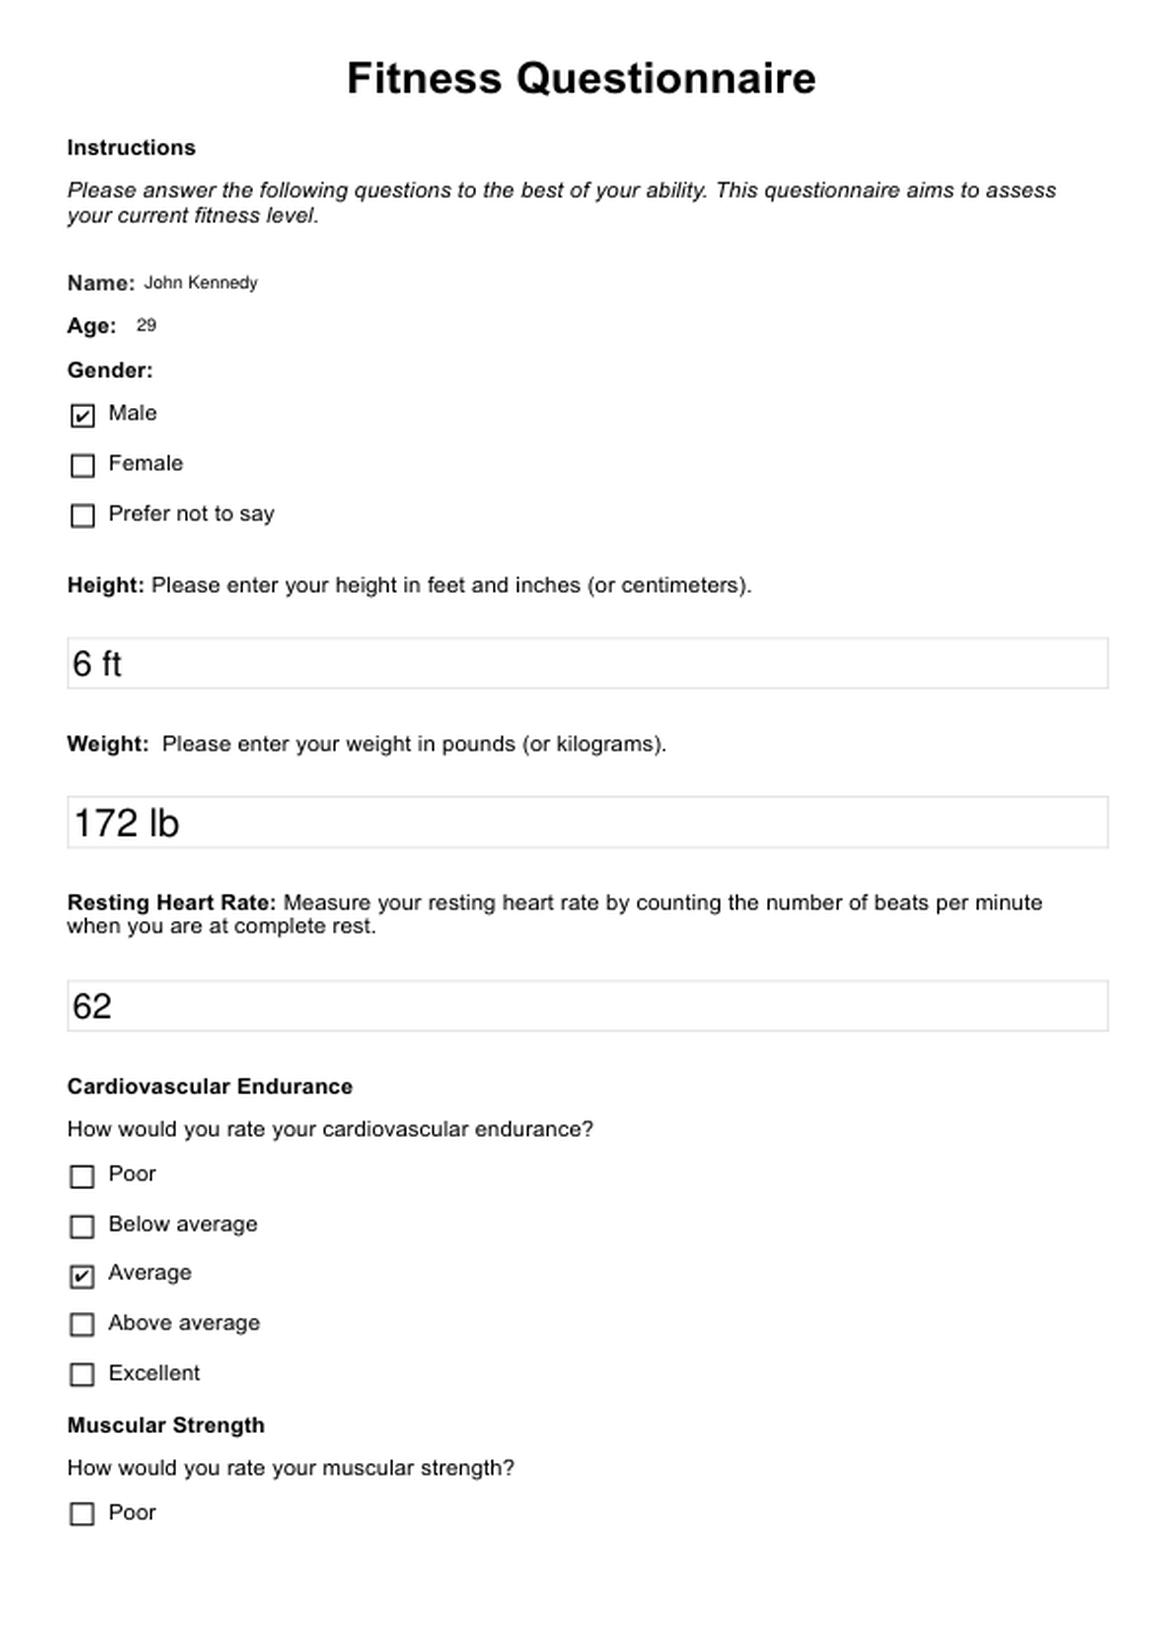 Fitness Questionnaire PDF Example